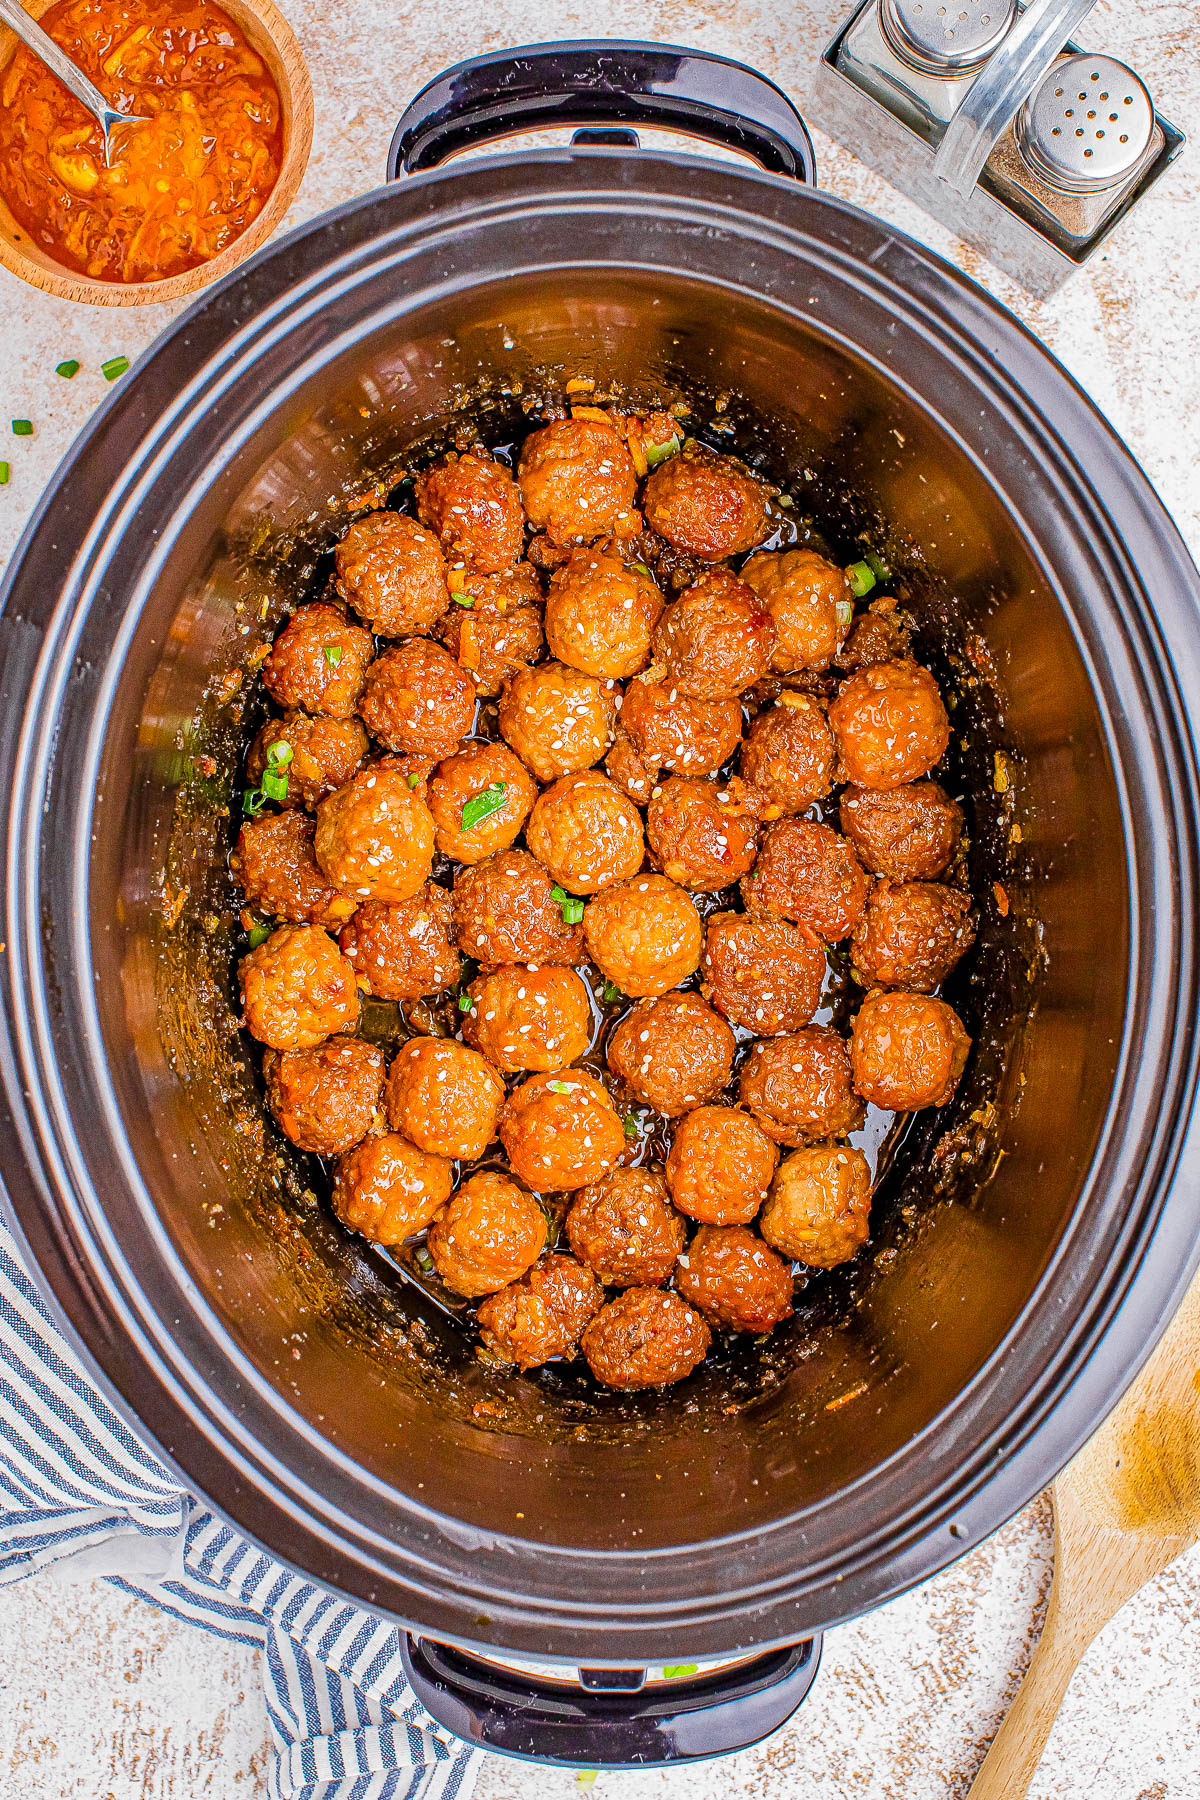 Top view of a slow cooker filled with glazed meatballs sprinkled with green onions.